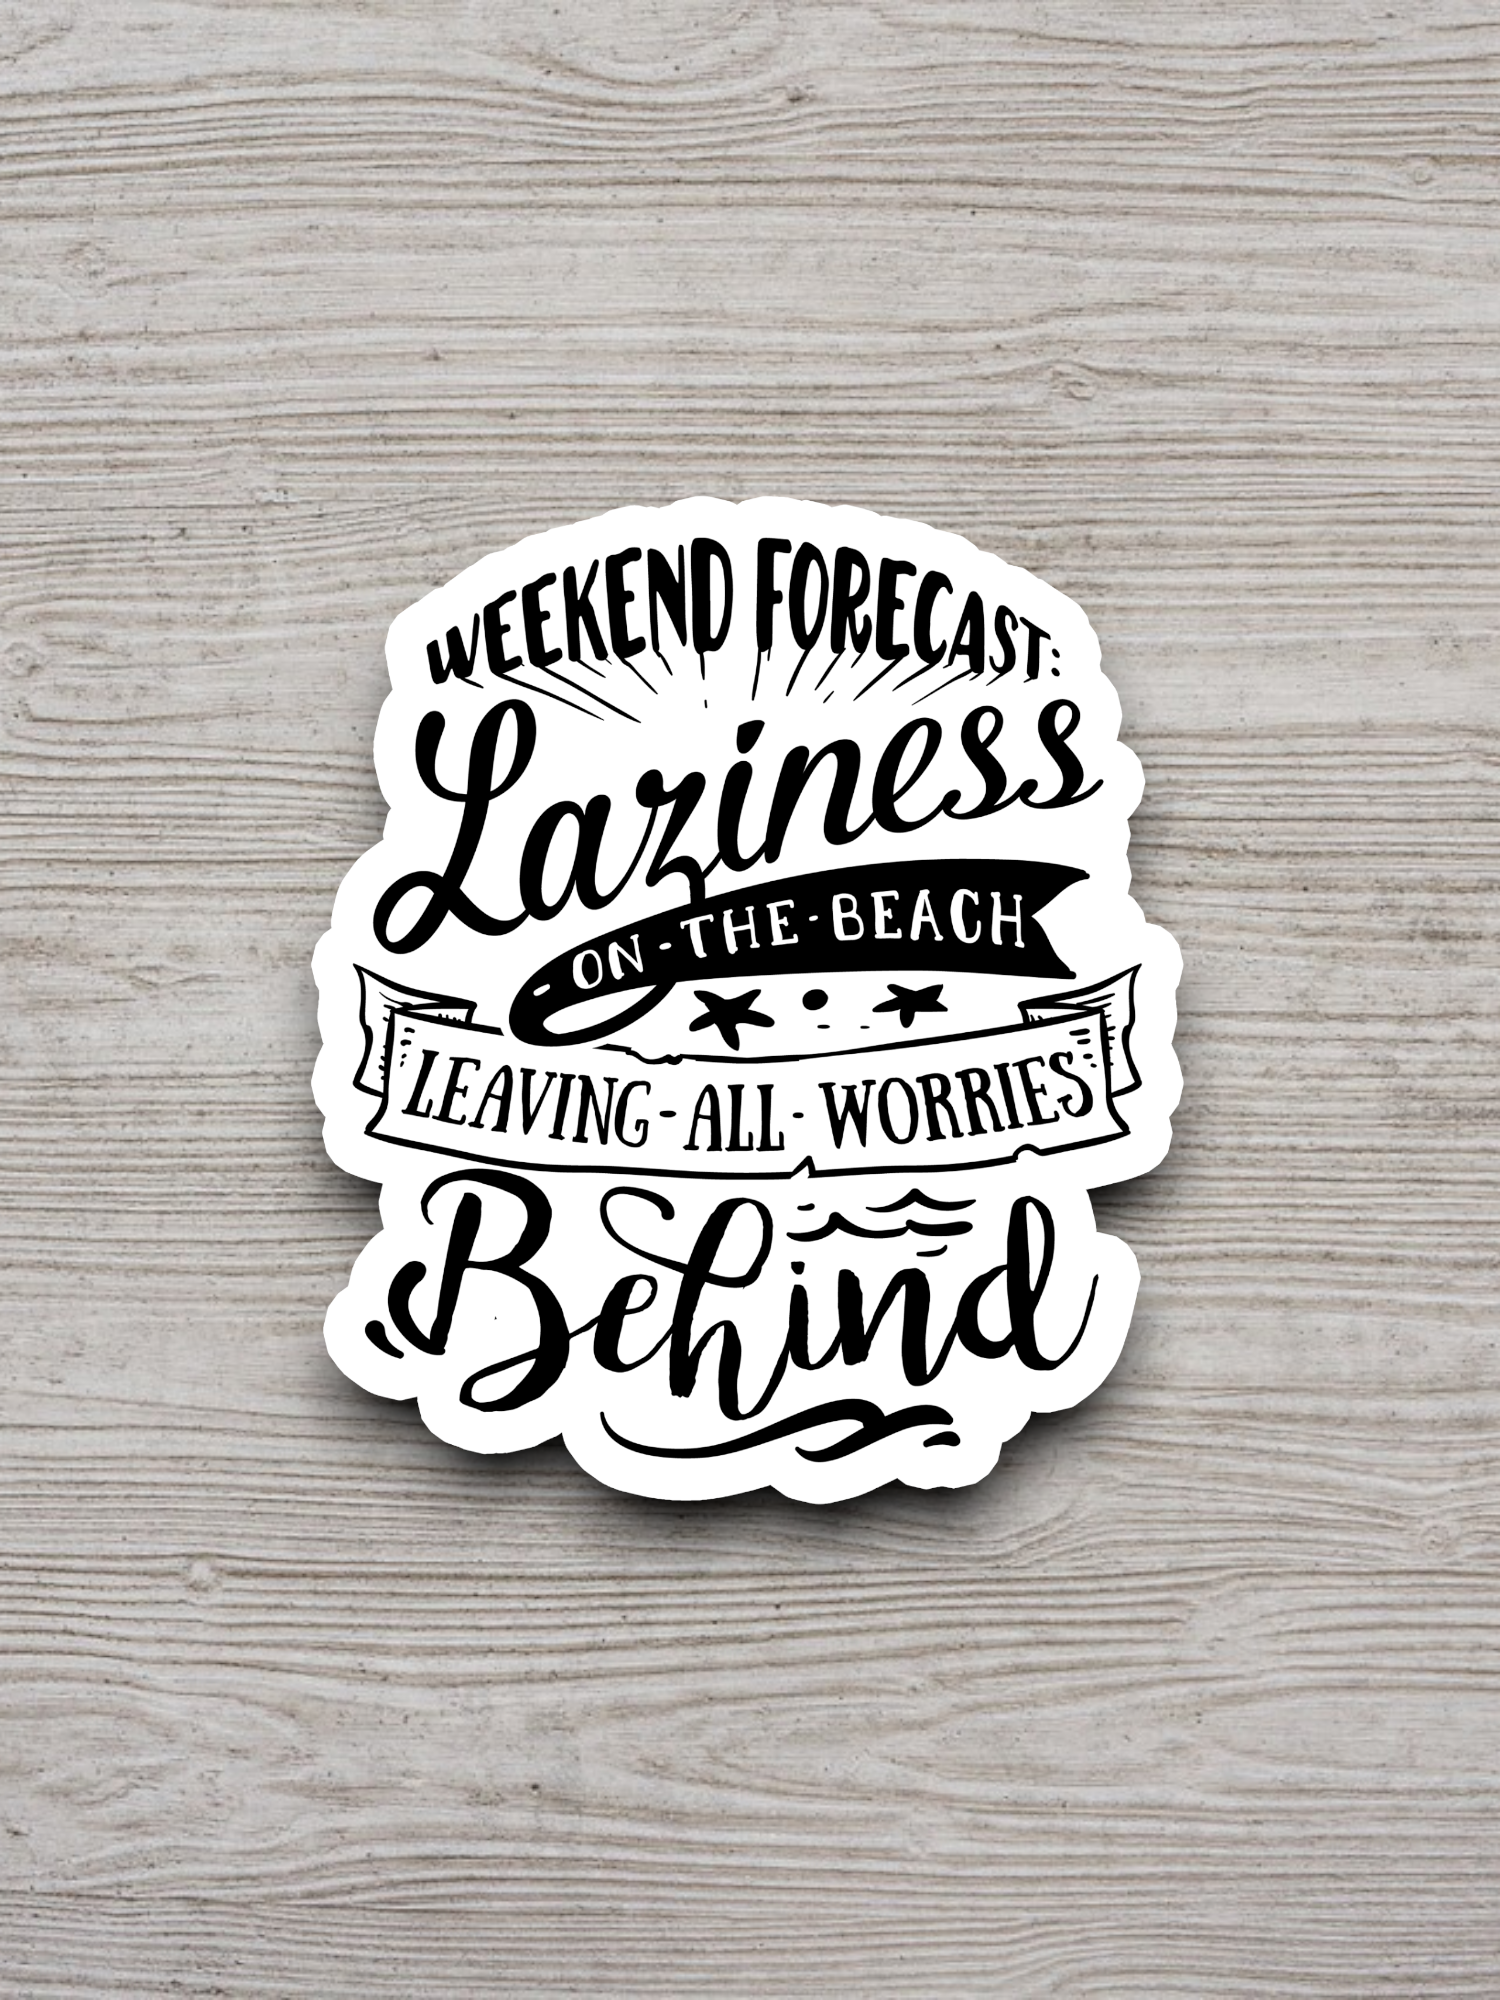 Laziness on the Beach Leaving All Worries Behind Travel Sticker